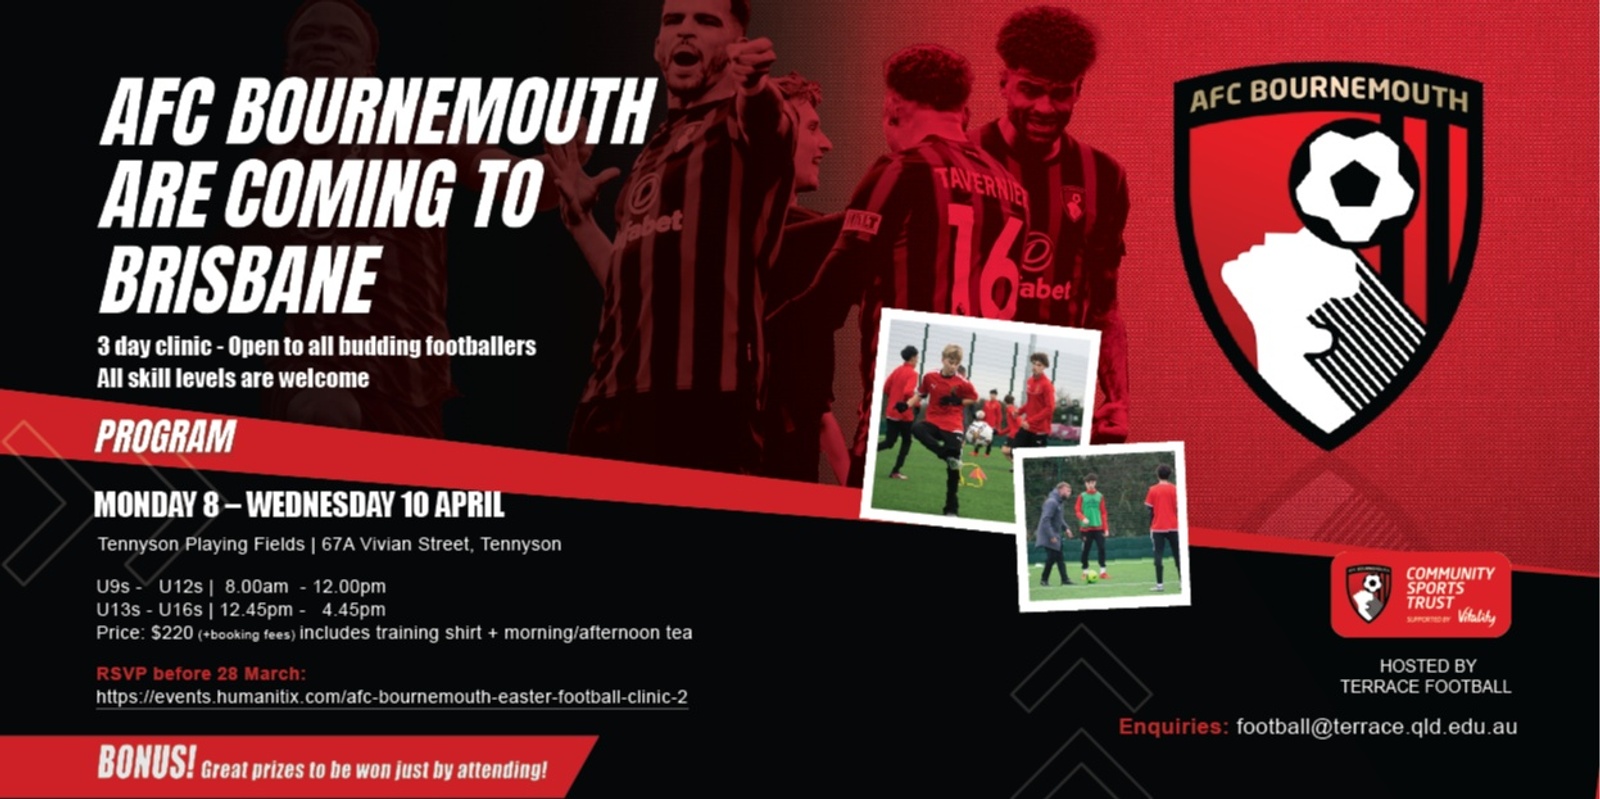 Banner image for AFC Bournemouth Easter Football Clinic #2